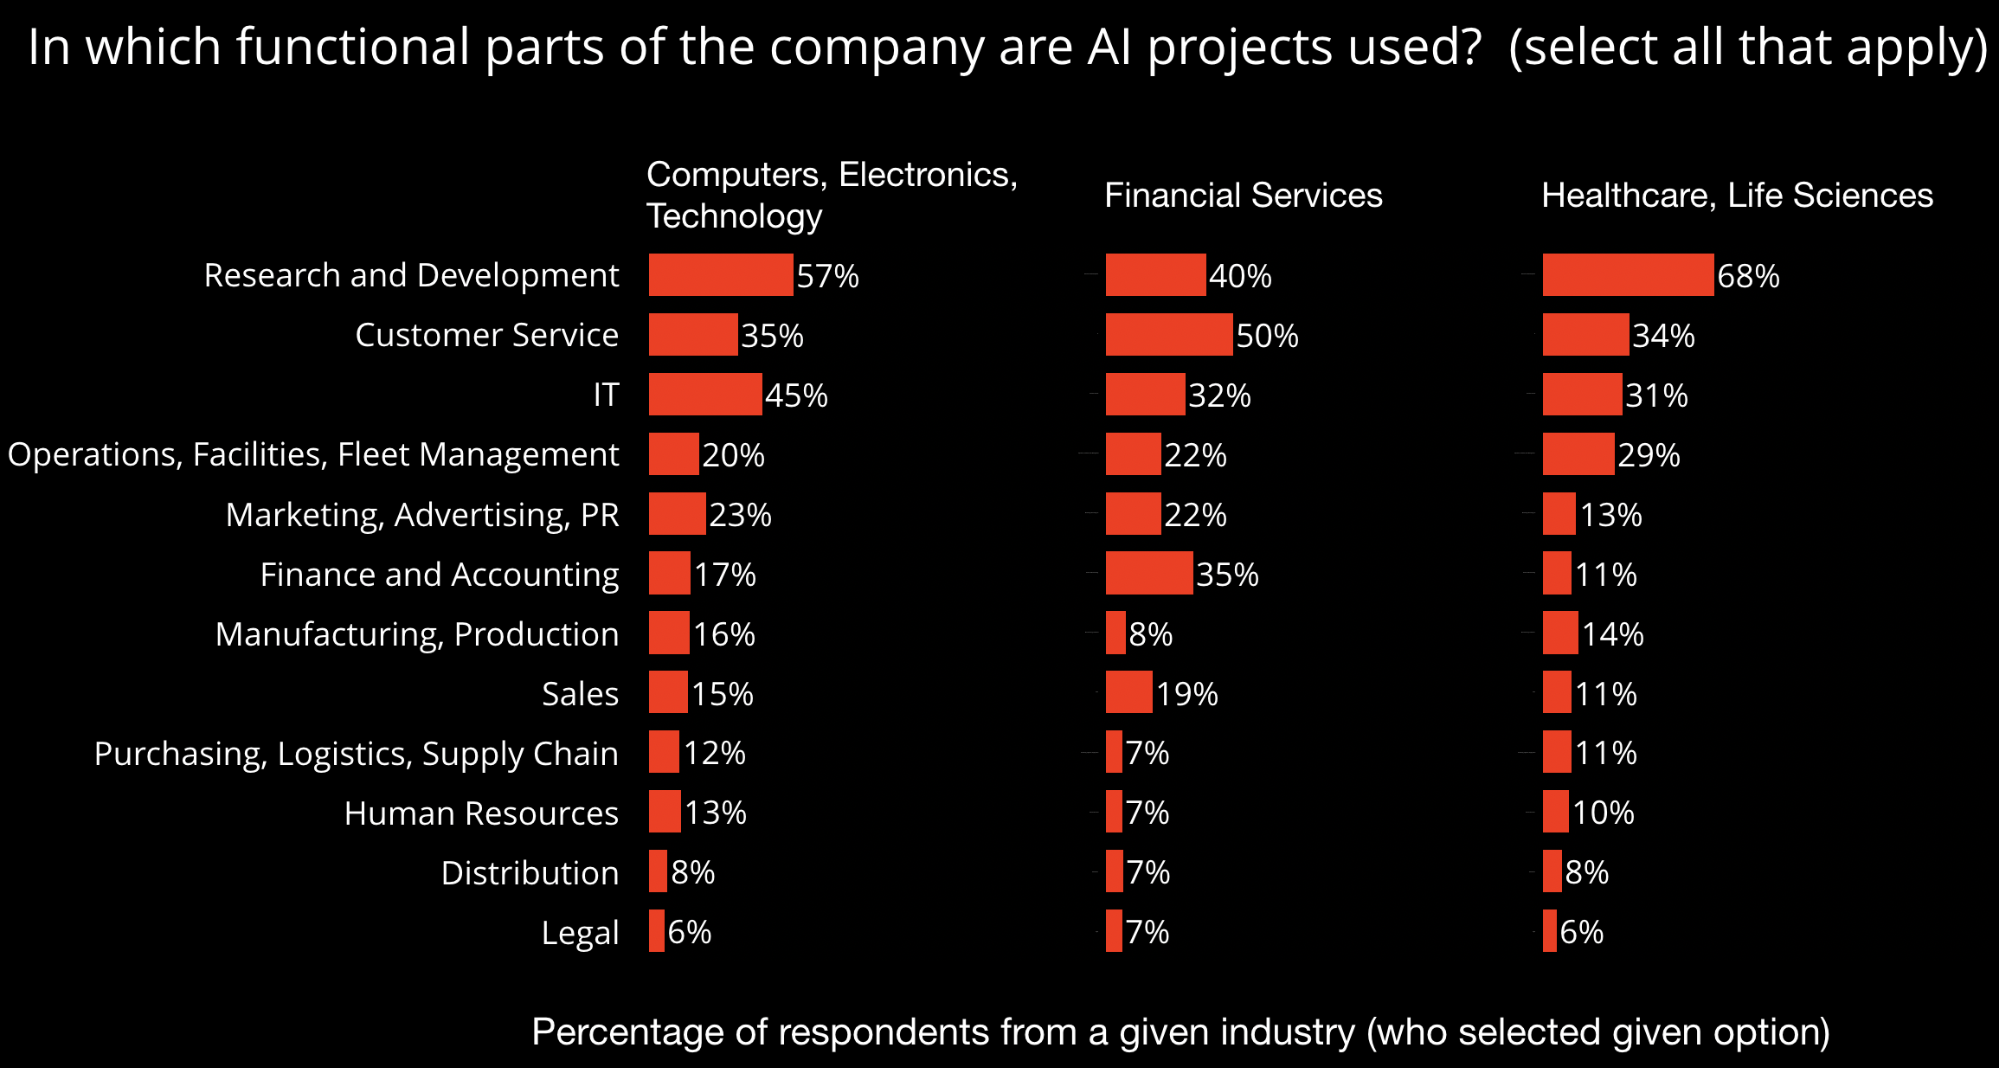 what parts of the company use AI projects